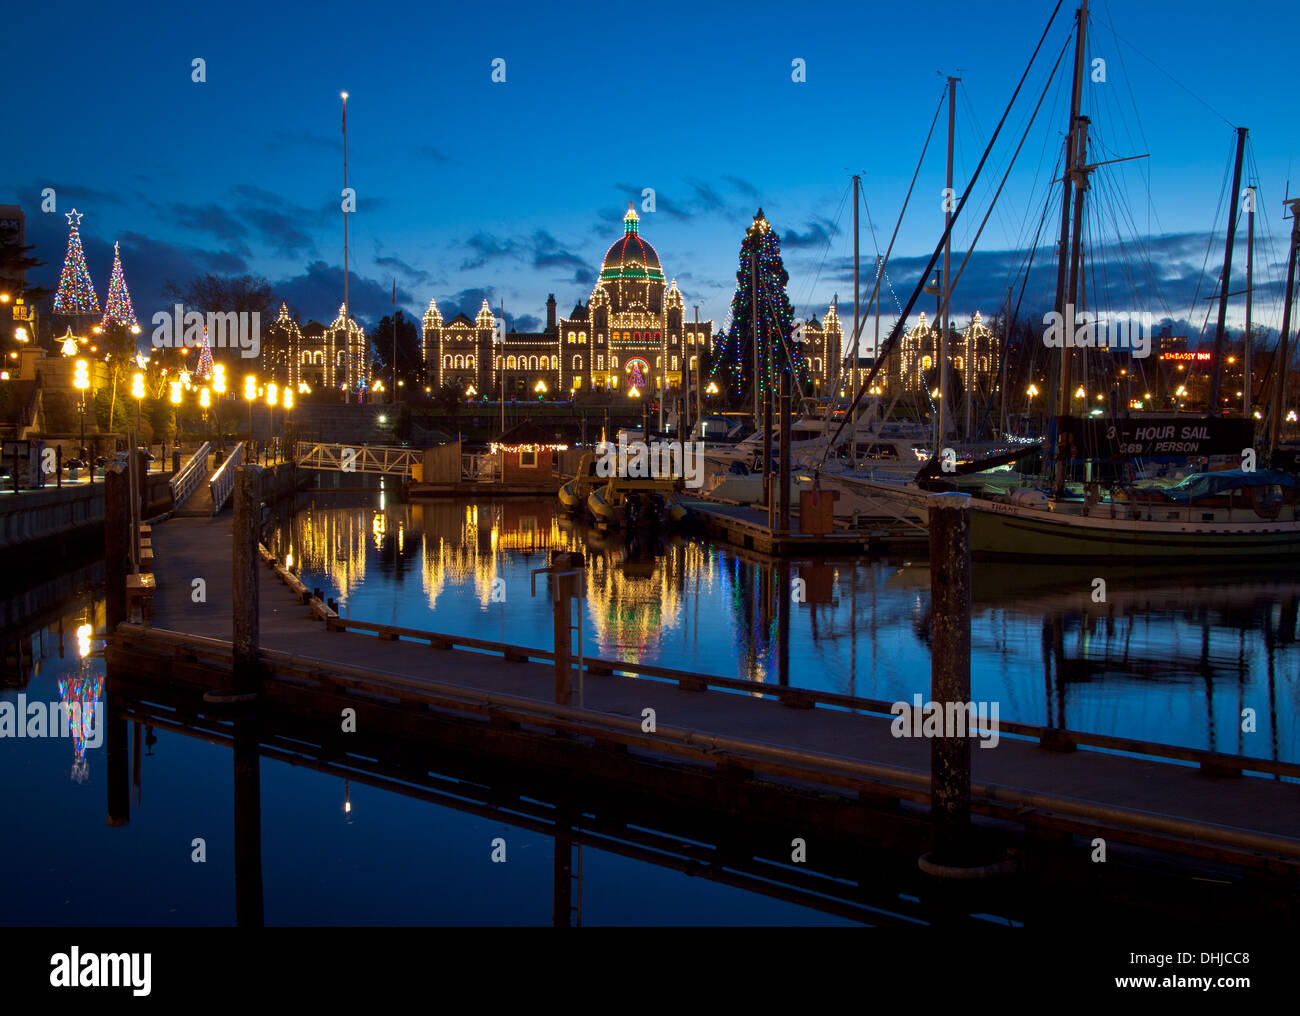 A view of the Inner Harbour and British Columbia Parliament Building at Christmas. Stock Photo